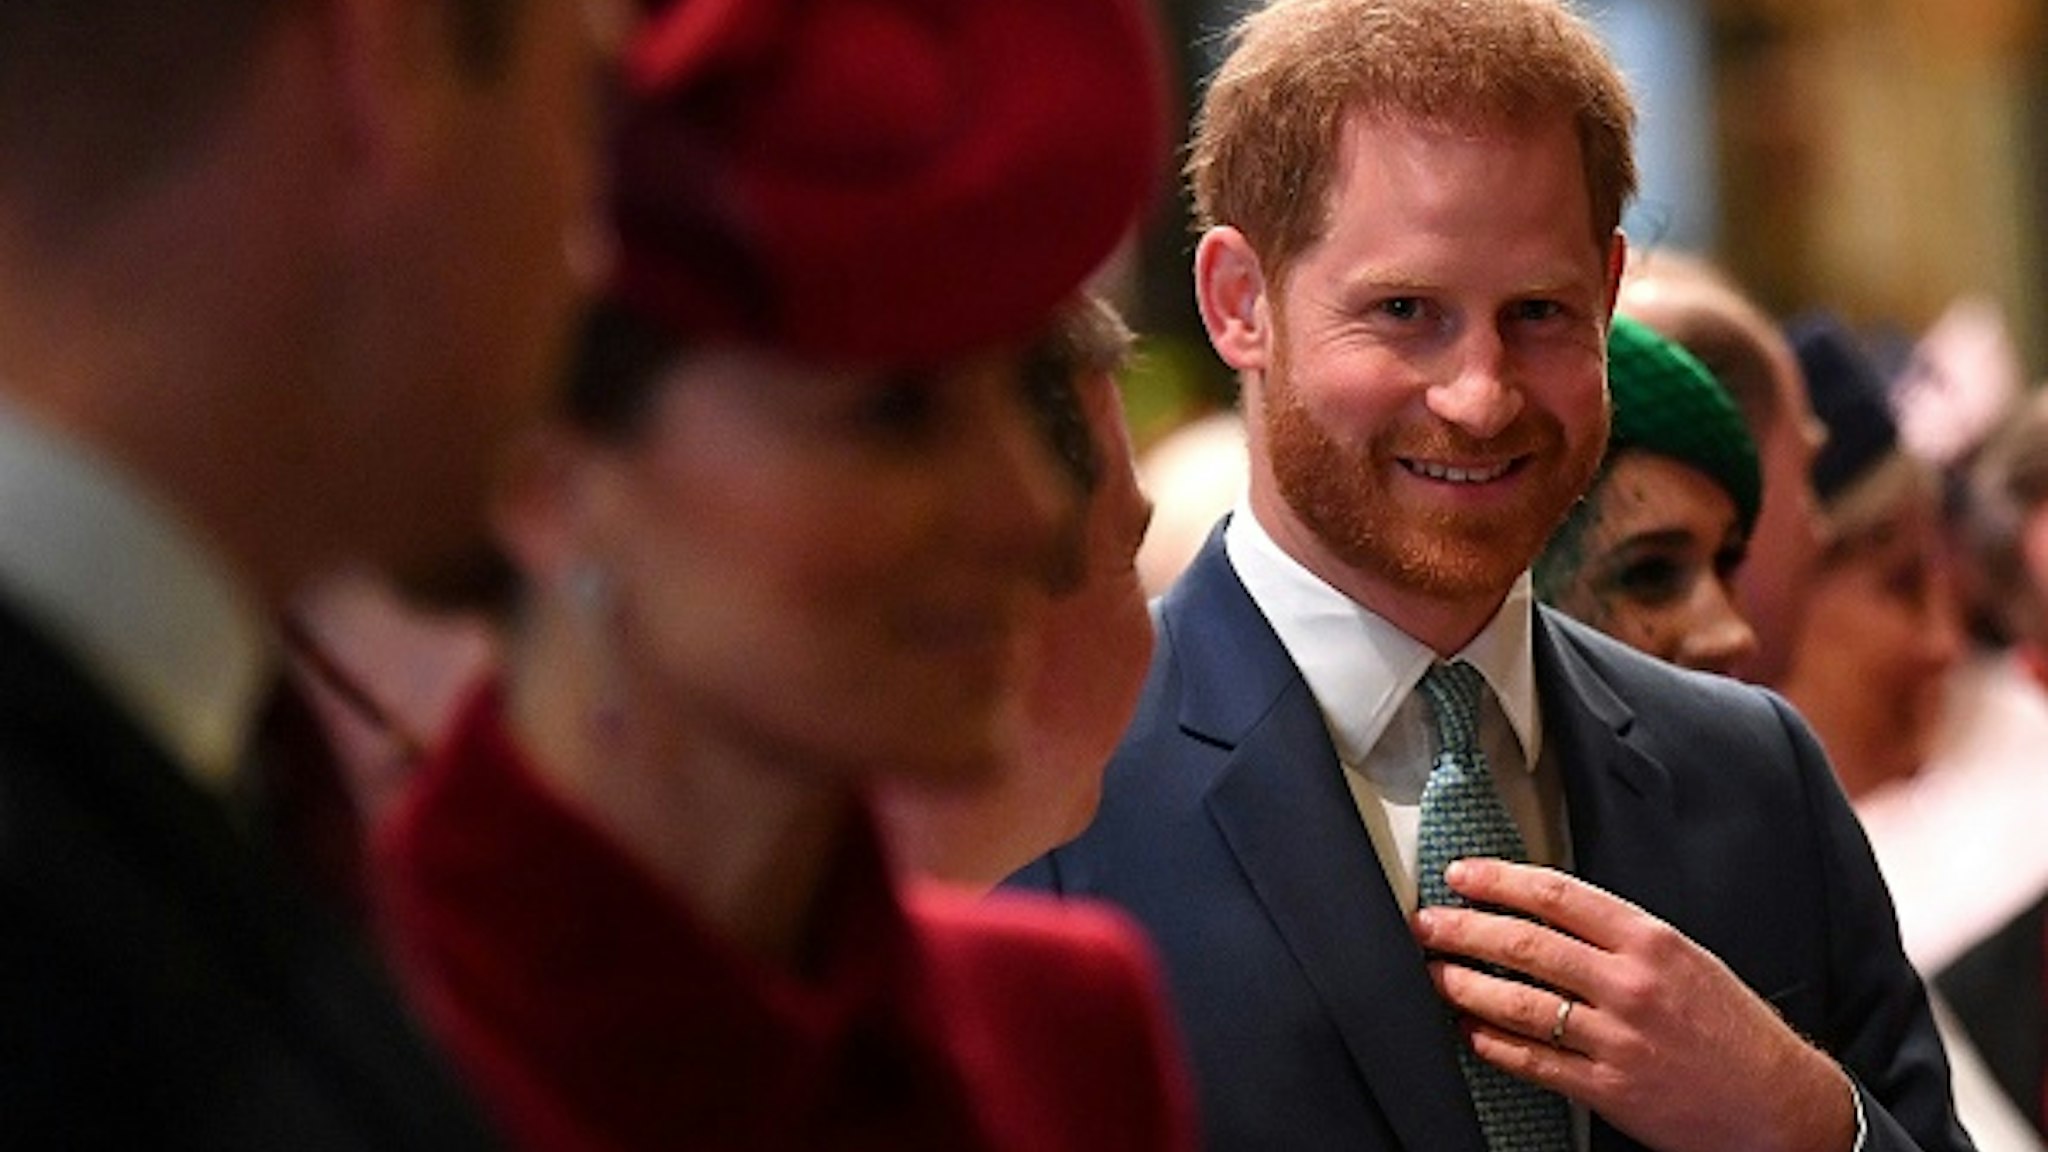 Britain's Prince Harry, Duke of Sussex (C) is introduced to performers as he leaves with Britain's Prince William, Duke of Cambridge (L) and Britain's Catherine, Duchess of Cambridge (2L) after attending the annual Commonwealth Service at Westminster Abbey in London on March 09, 2020. - Britain's Queen Elizabeth II has been the Head of the Commonwealth throughout her reign. Organised by the Royal Commonwealth Society, the Service is the largest annual inter-faith gathering in the United Kingdom.